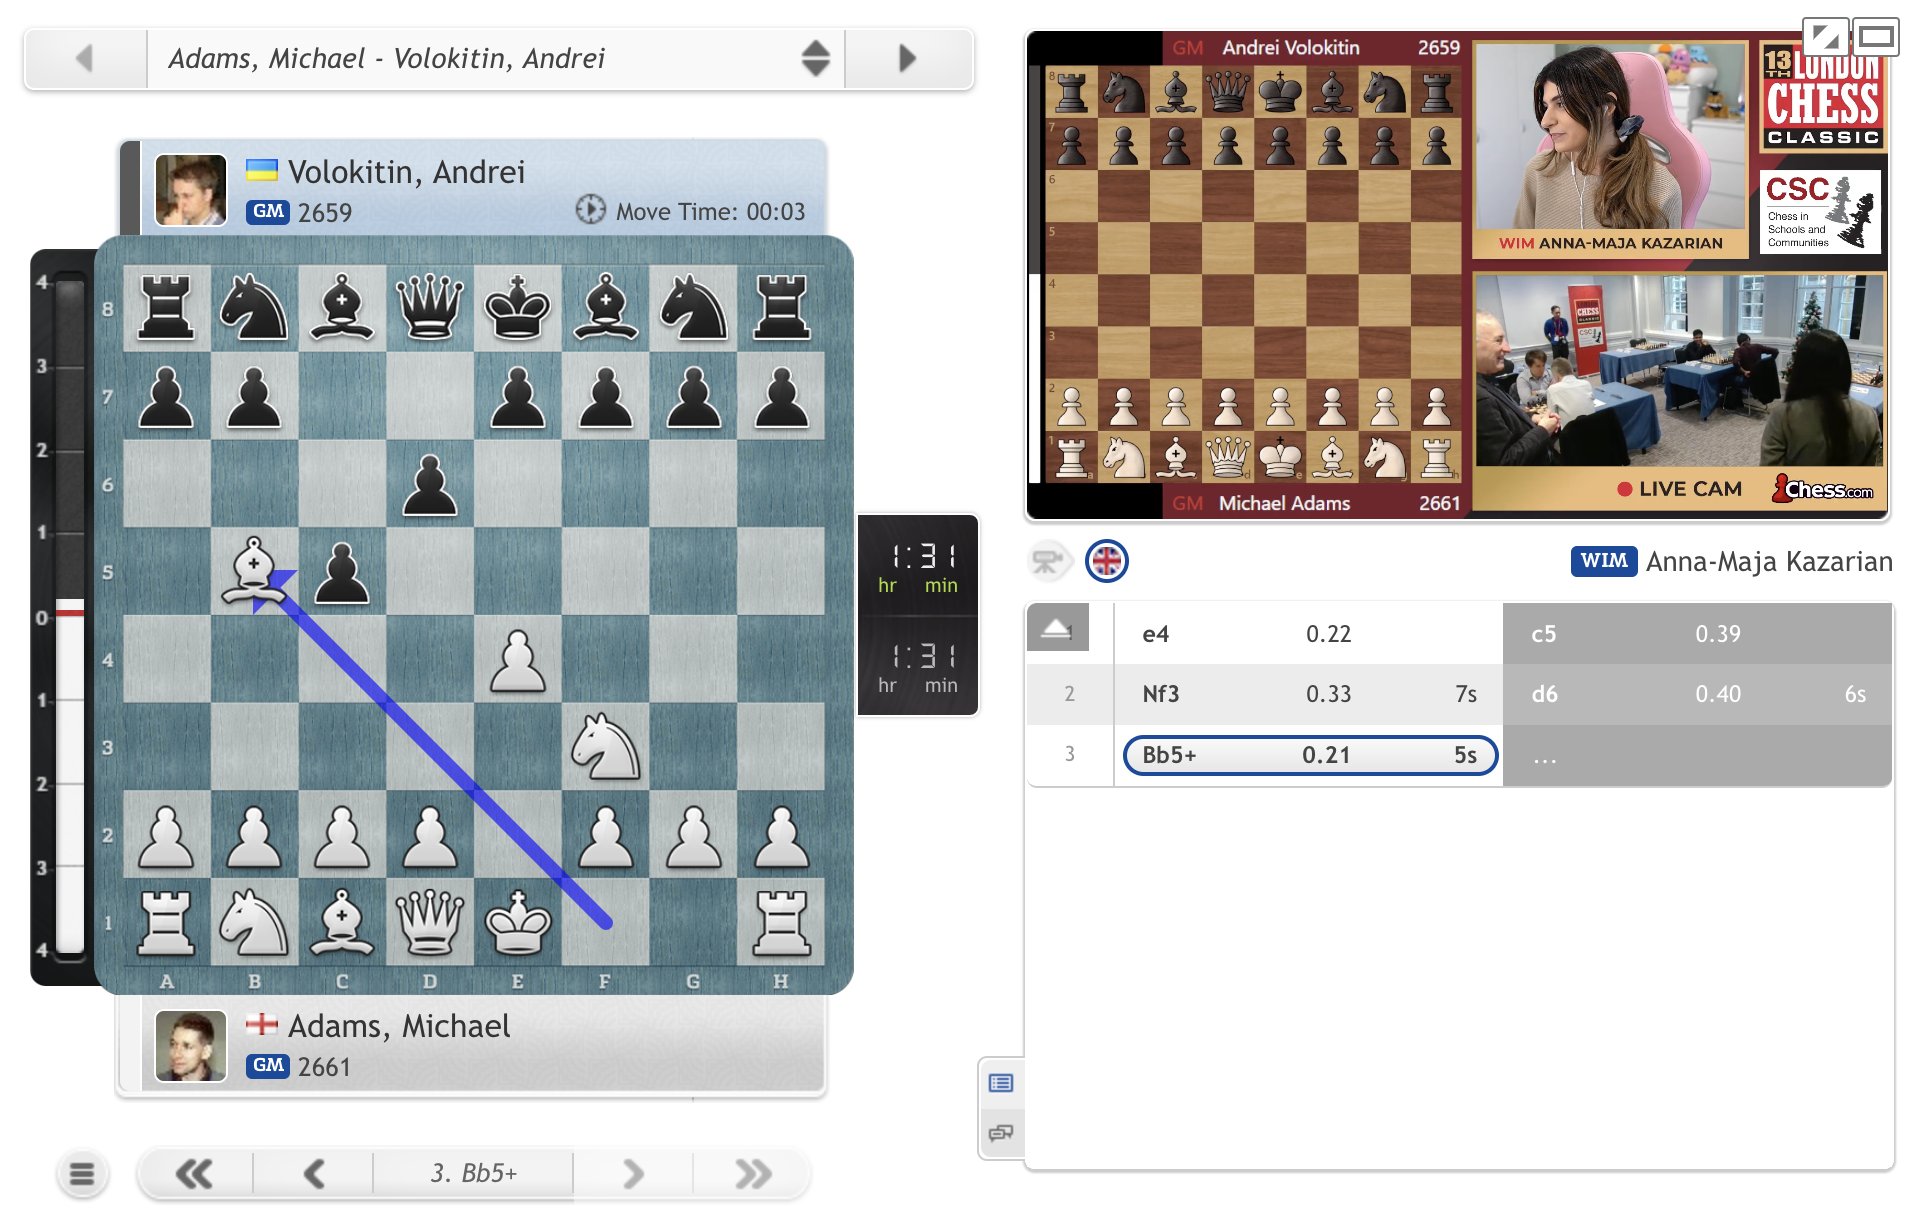 chess24.com on X: Round 7 of the #LondonChessClassic has begun